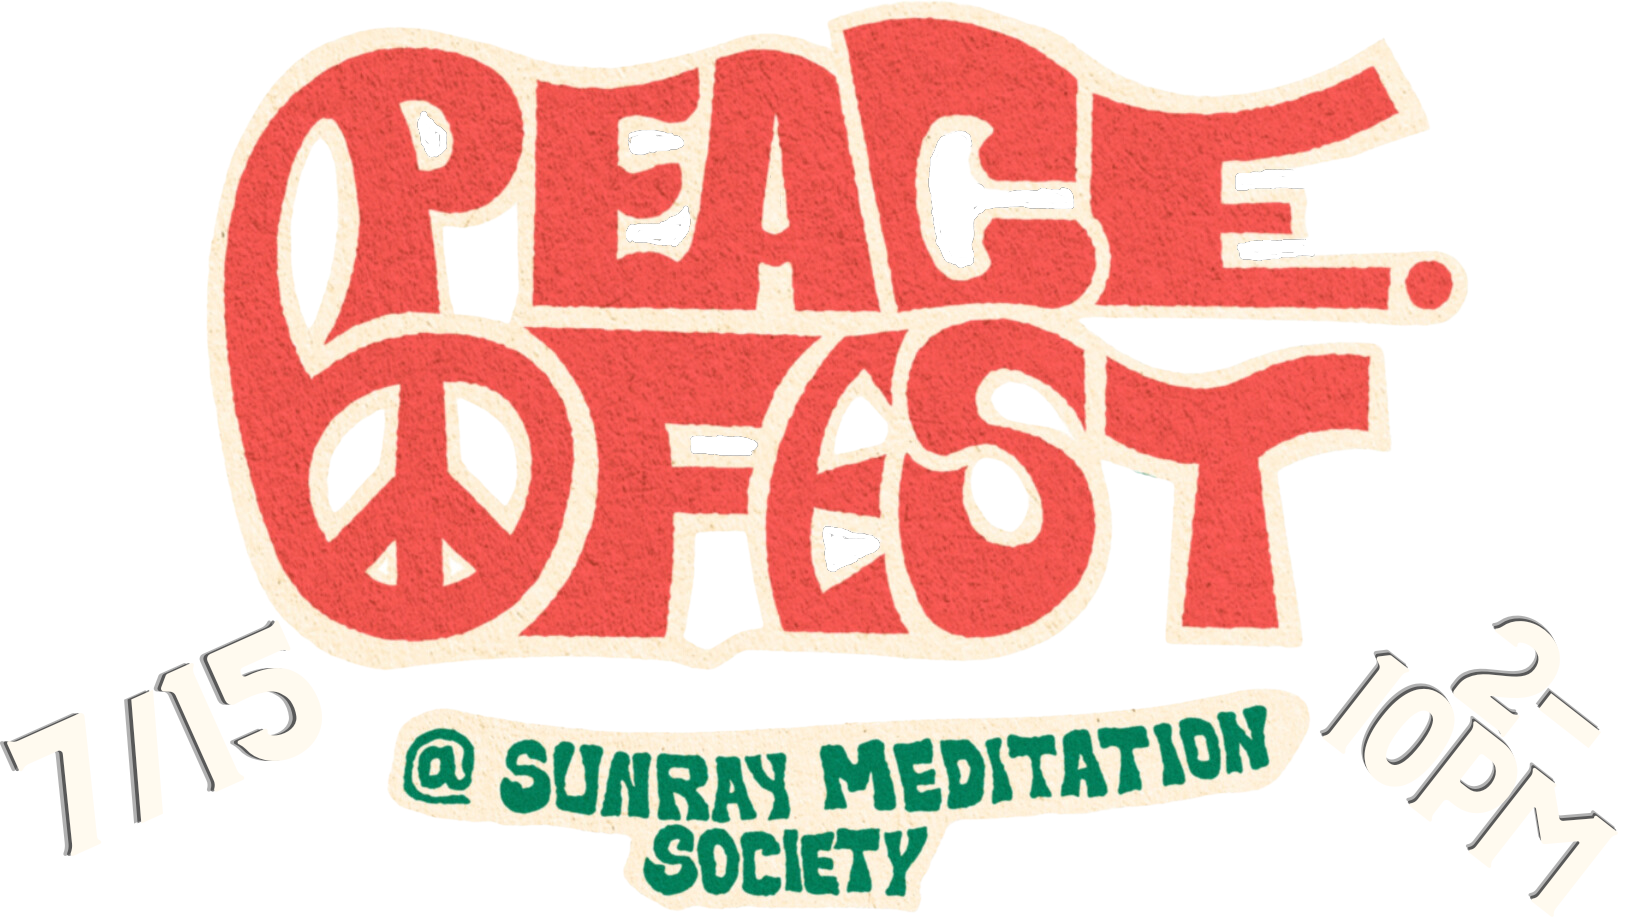 Peace.Fest A Substance Free Community and Music Festival